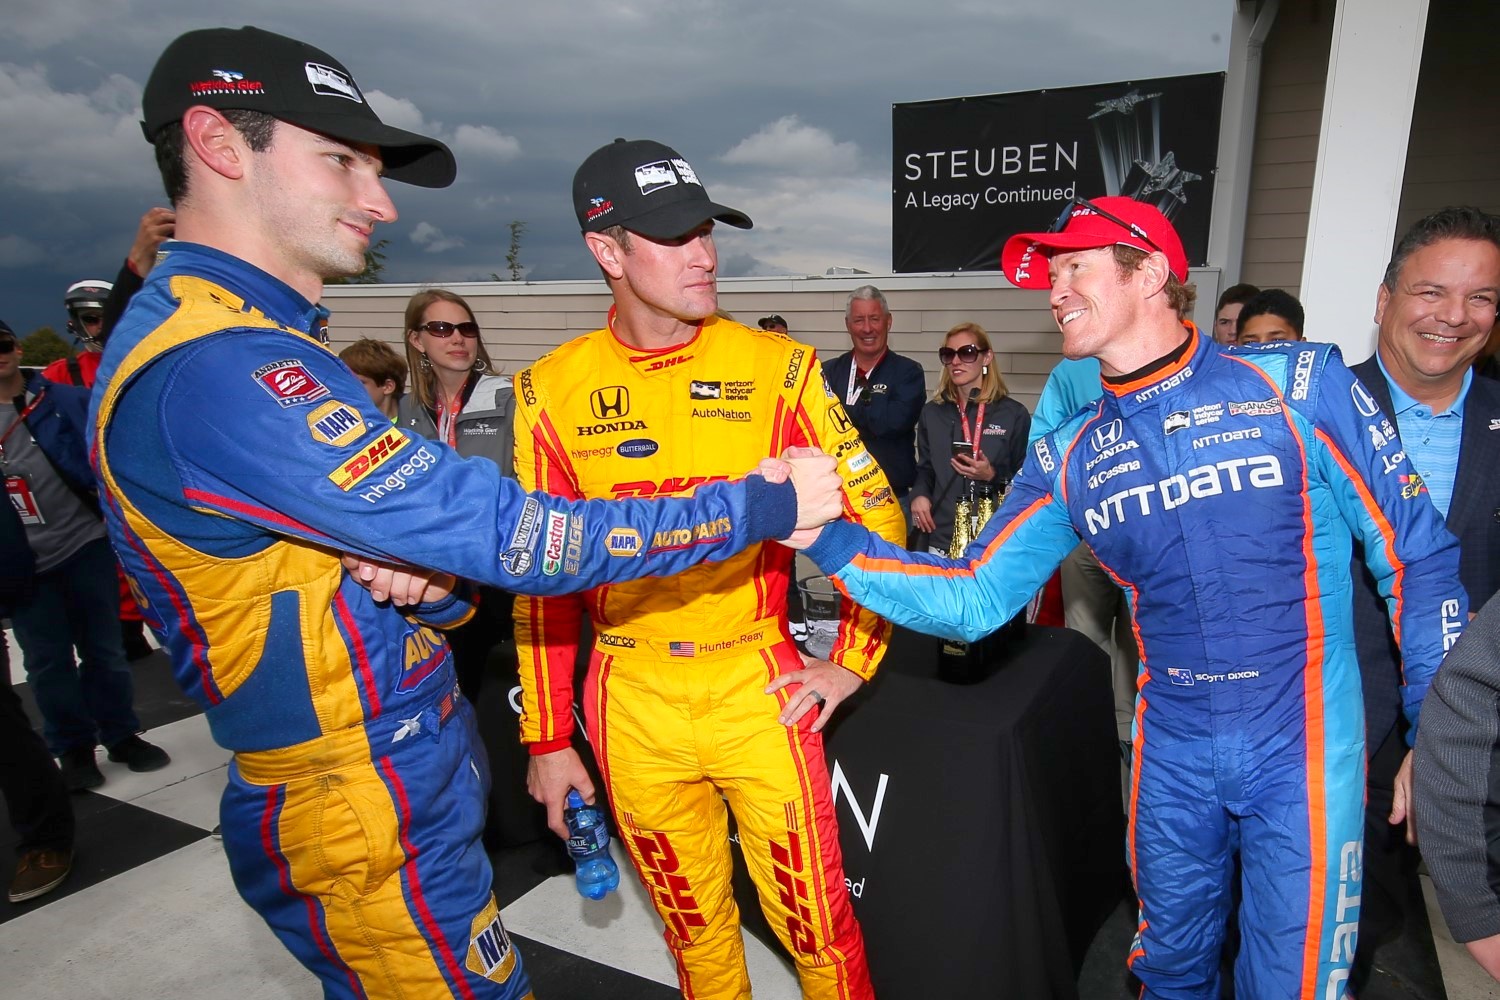 Will it be Alexander Rossi, Scott Dixon or someone else as 2018 champion?